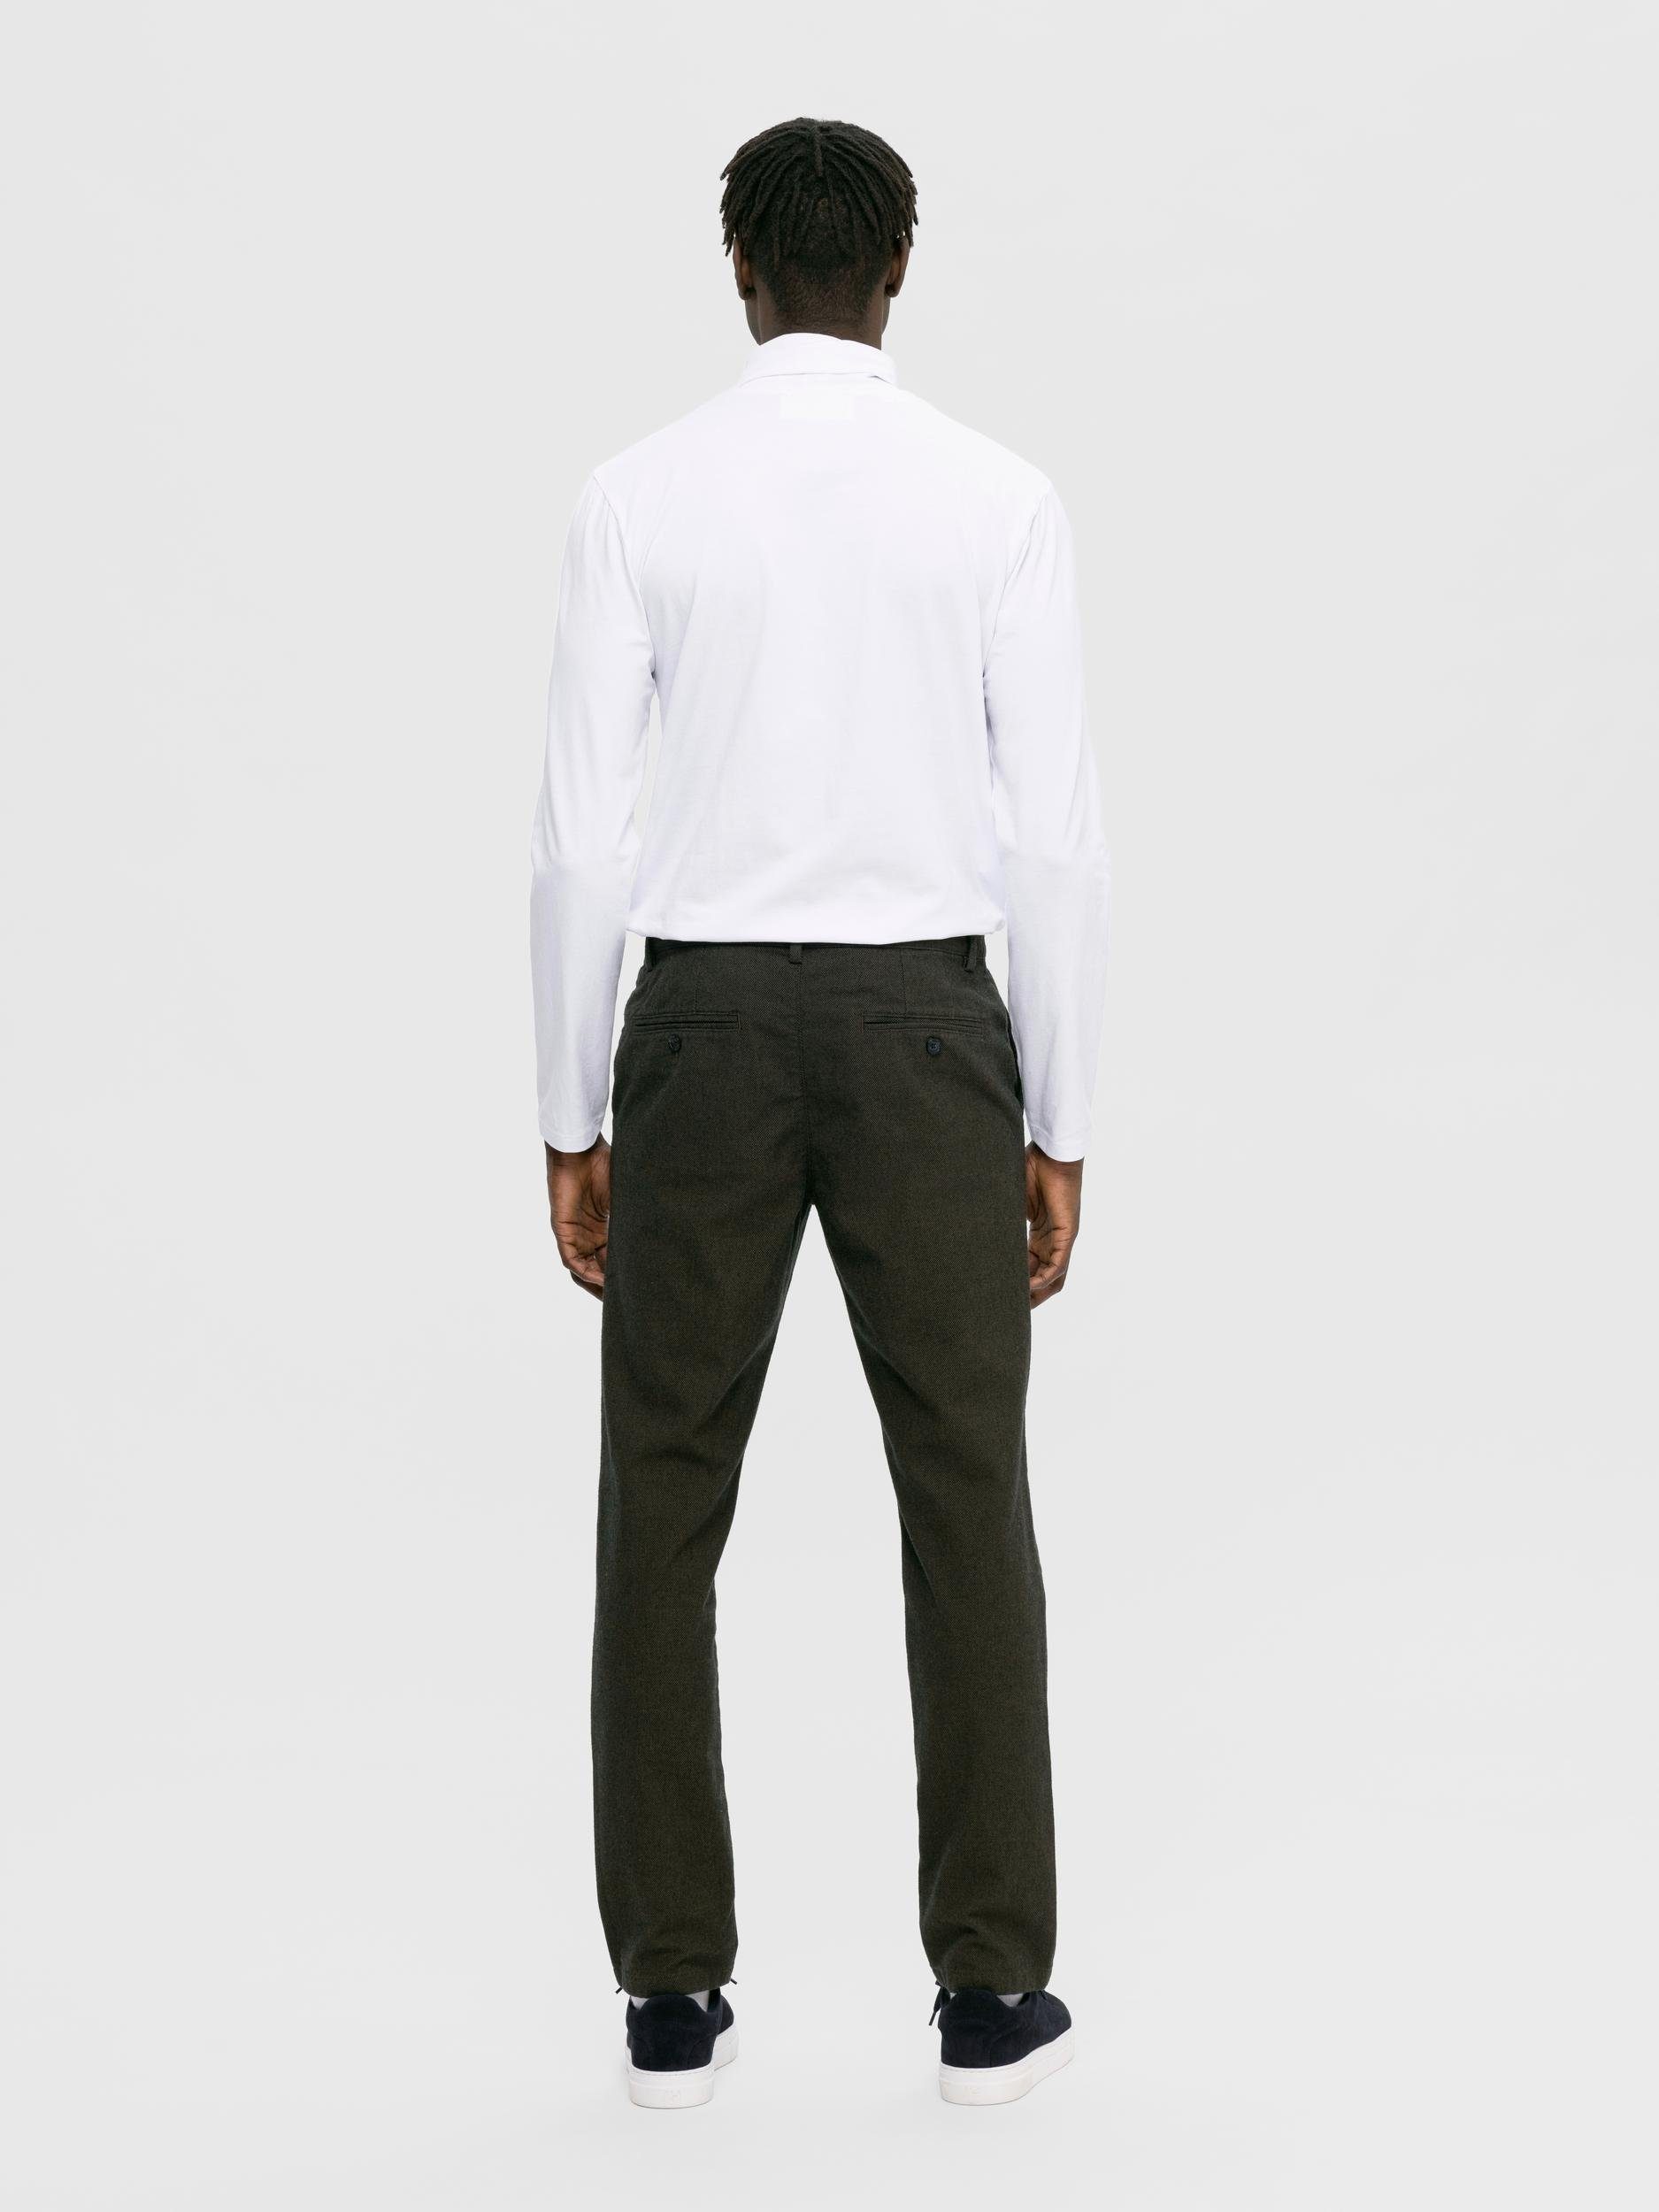 CHINO FIT Chinohose SELECTED HOMME BRUSHED forest SLIM night 175